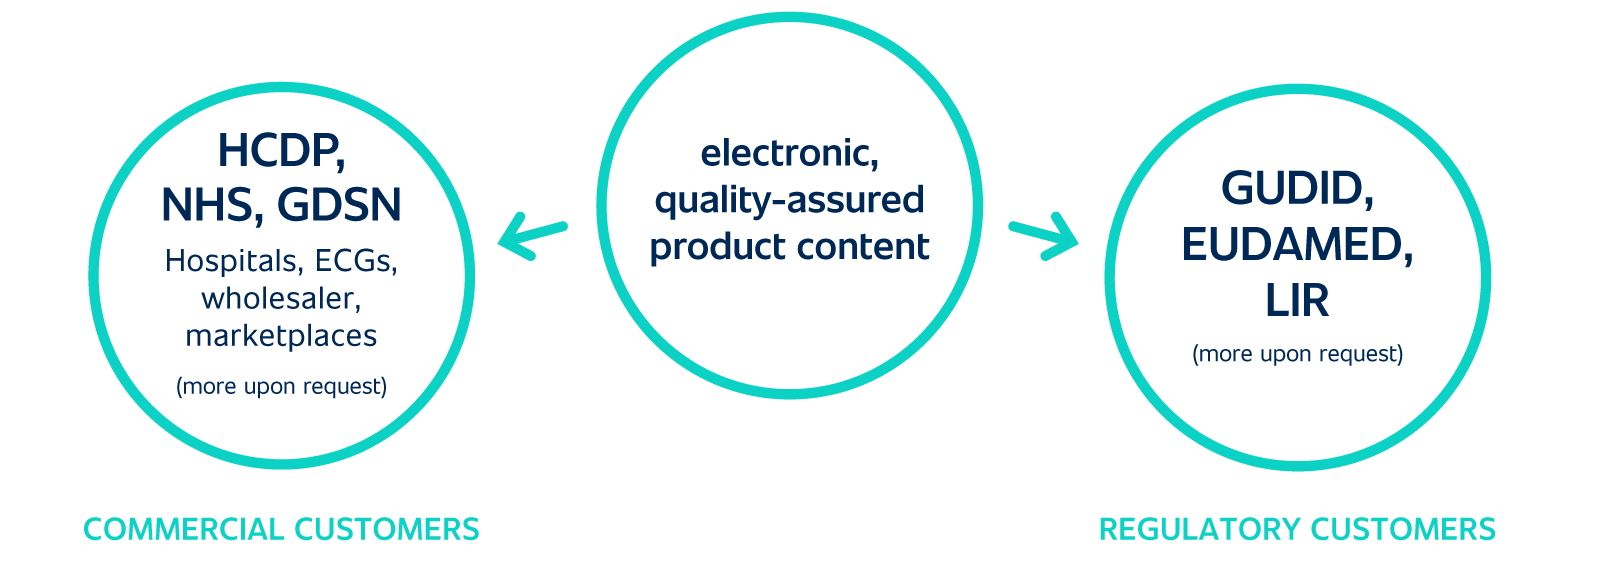 b-healthy enables manufacturers and suppliers to aggregate product content from various internal systems, enrich that content, ensure its quality and finally publish it to commercial customers such as hospitals and purchasing groups as well as regulatory customers such as the FDA’s GUDID, EUDAMED or the LIR.